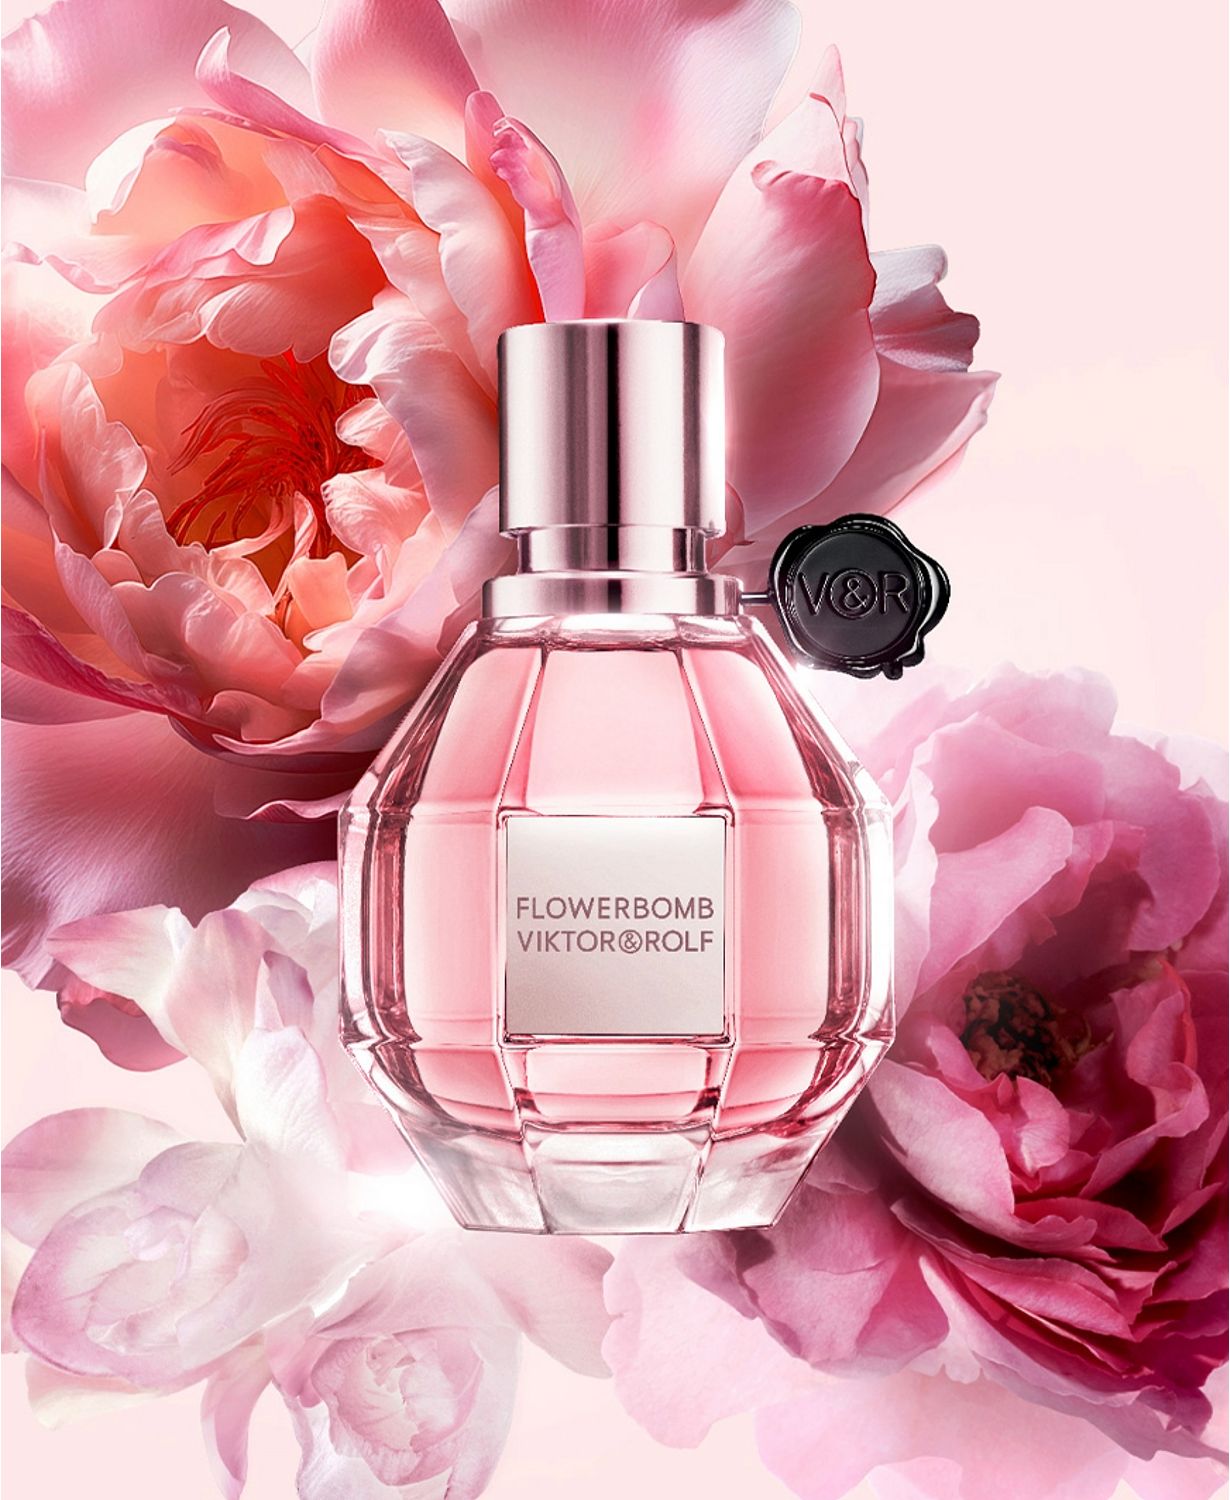 3-Pc. Flowerbomb Fragrance Discovery Set, Created for Macy's